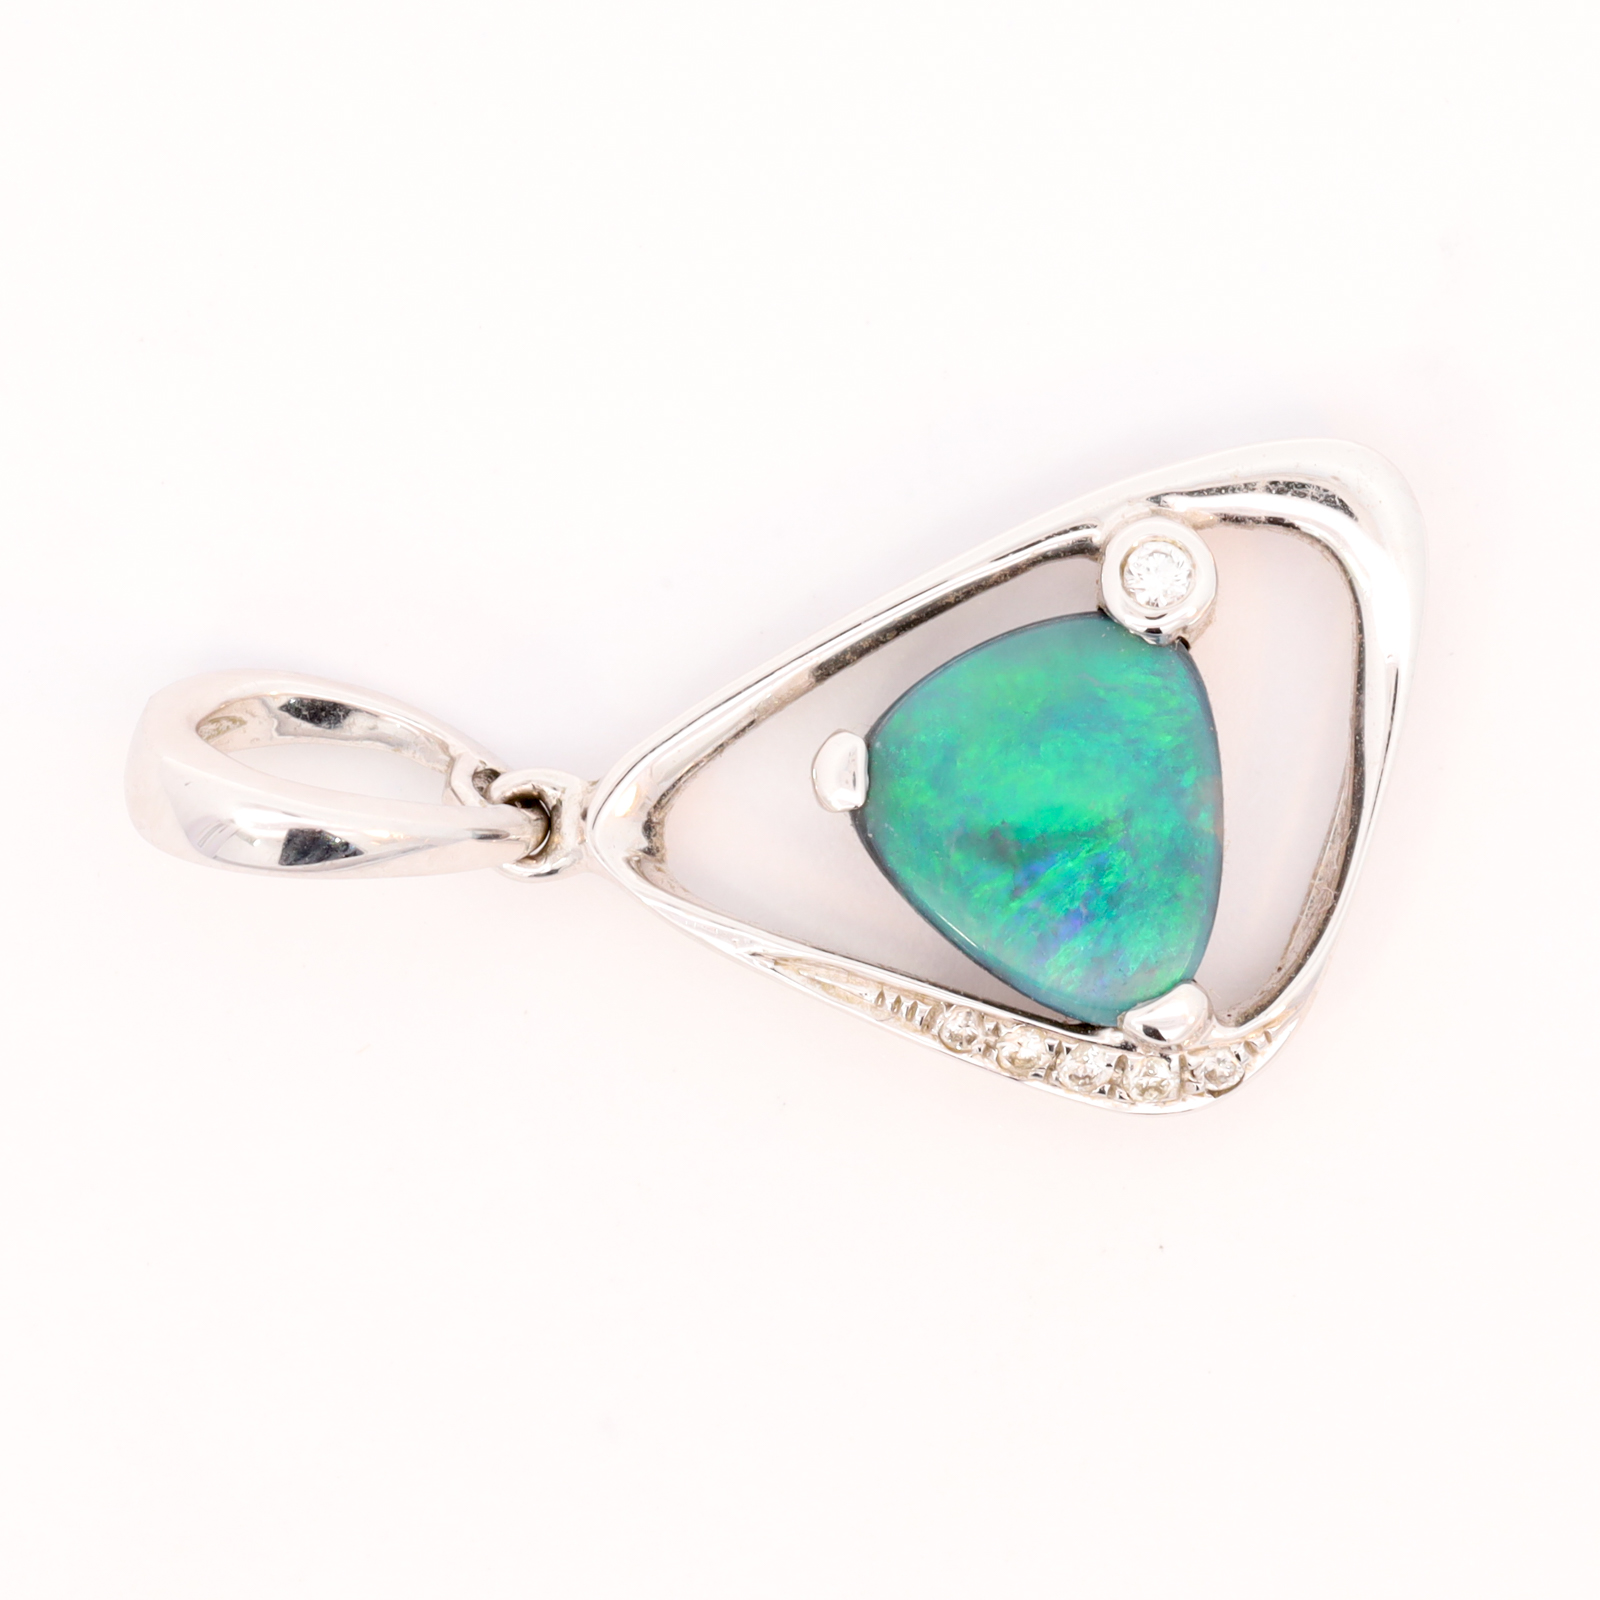 White Gold Blue Green Solid Australian Black Opal and Diamond Necklace Pendant